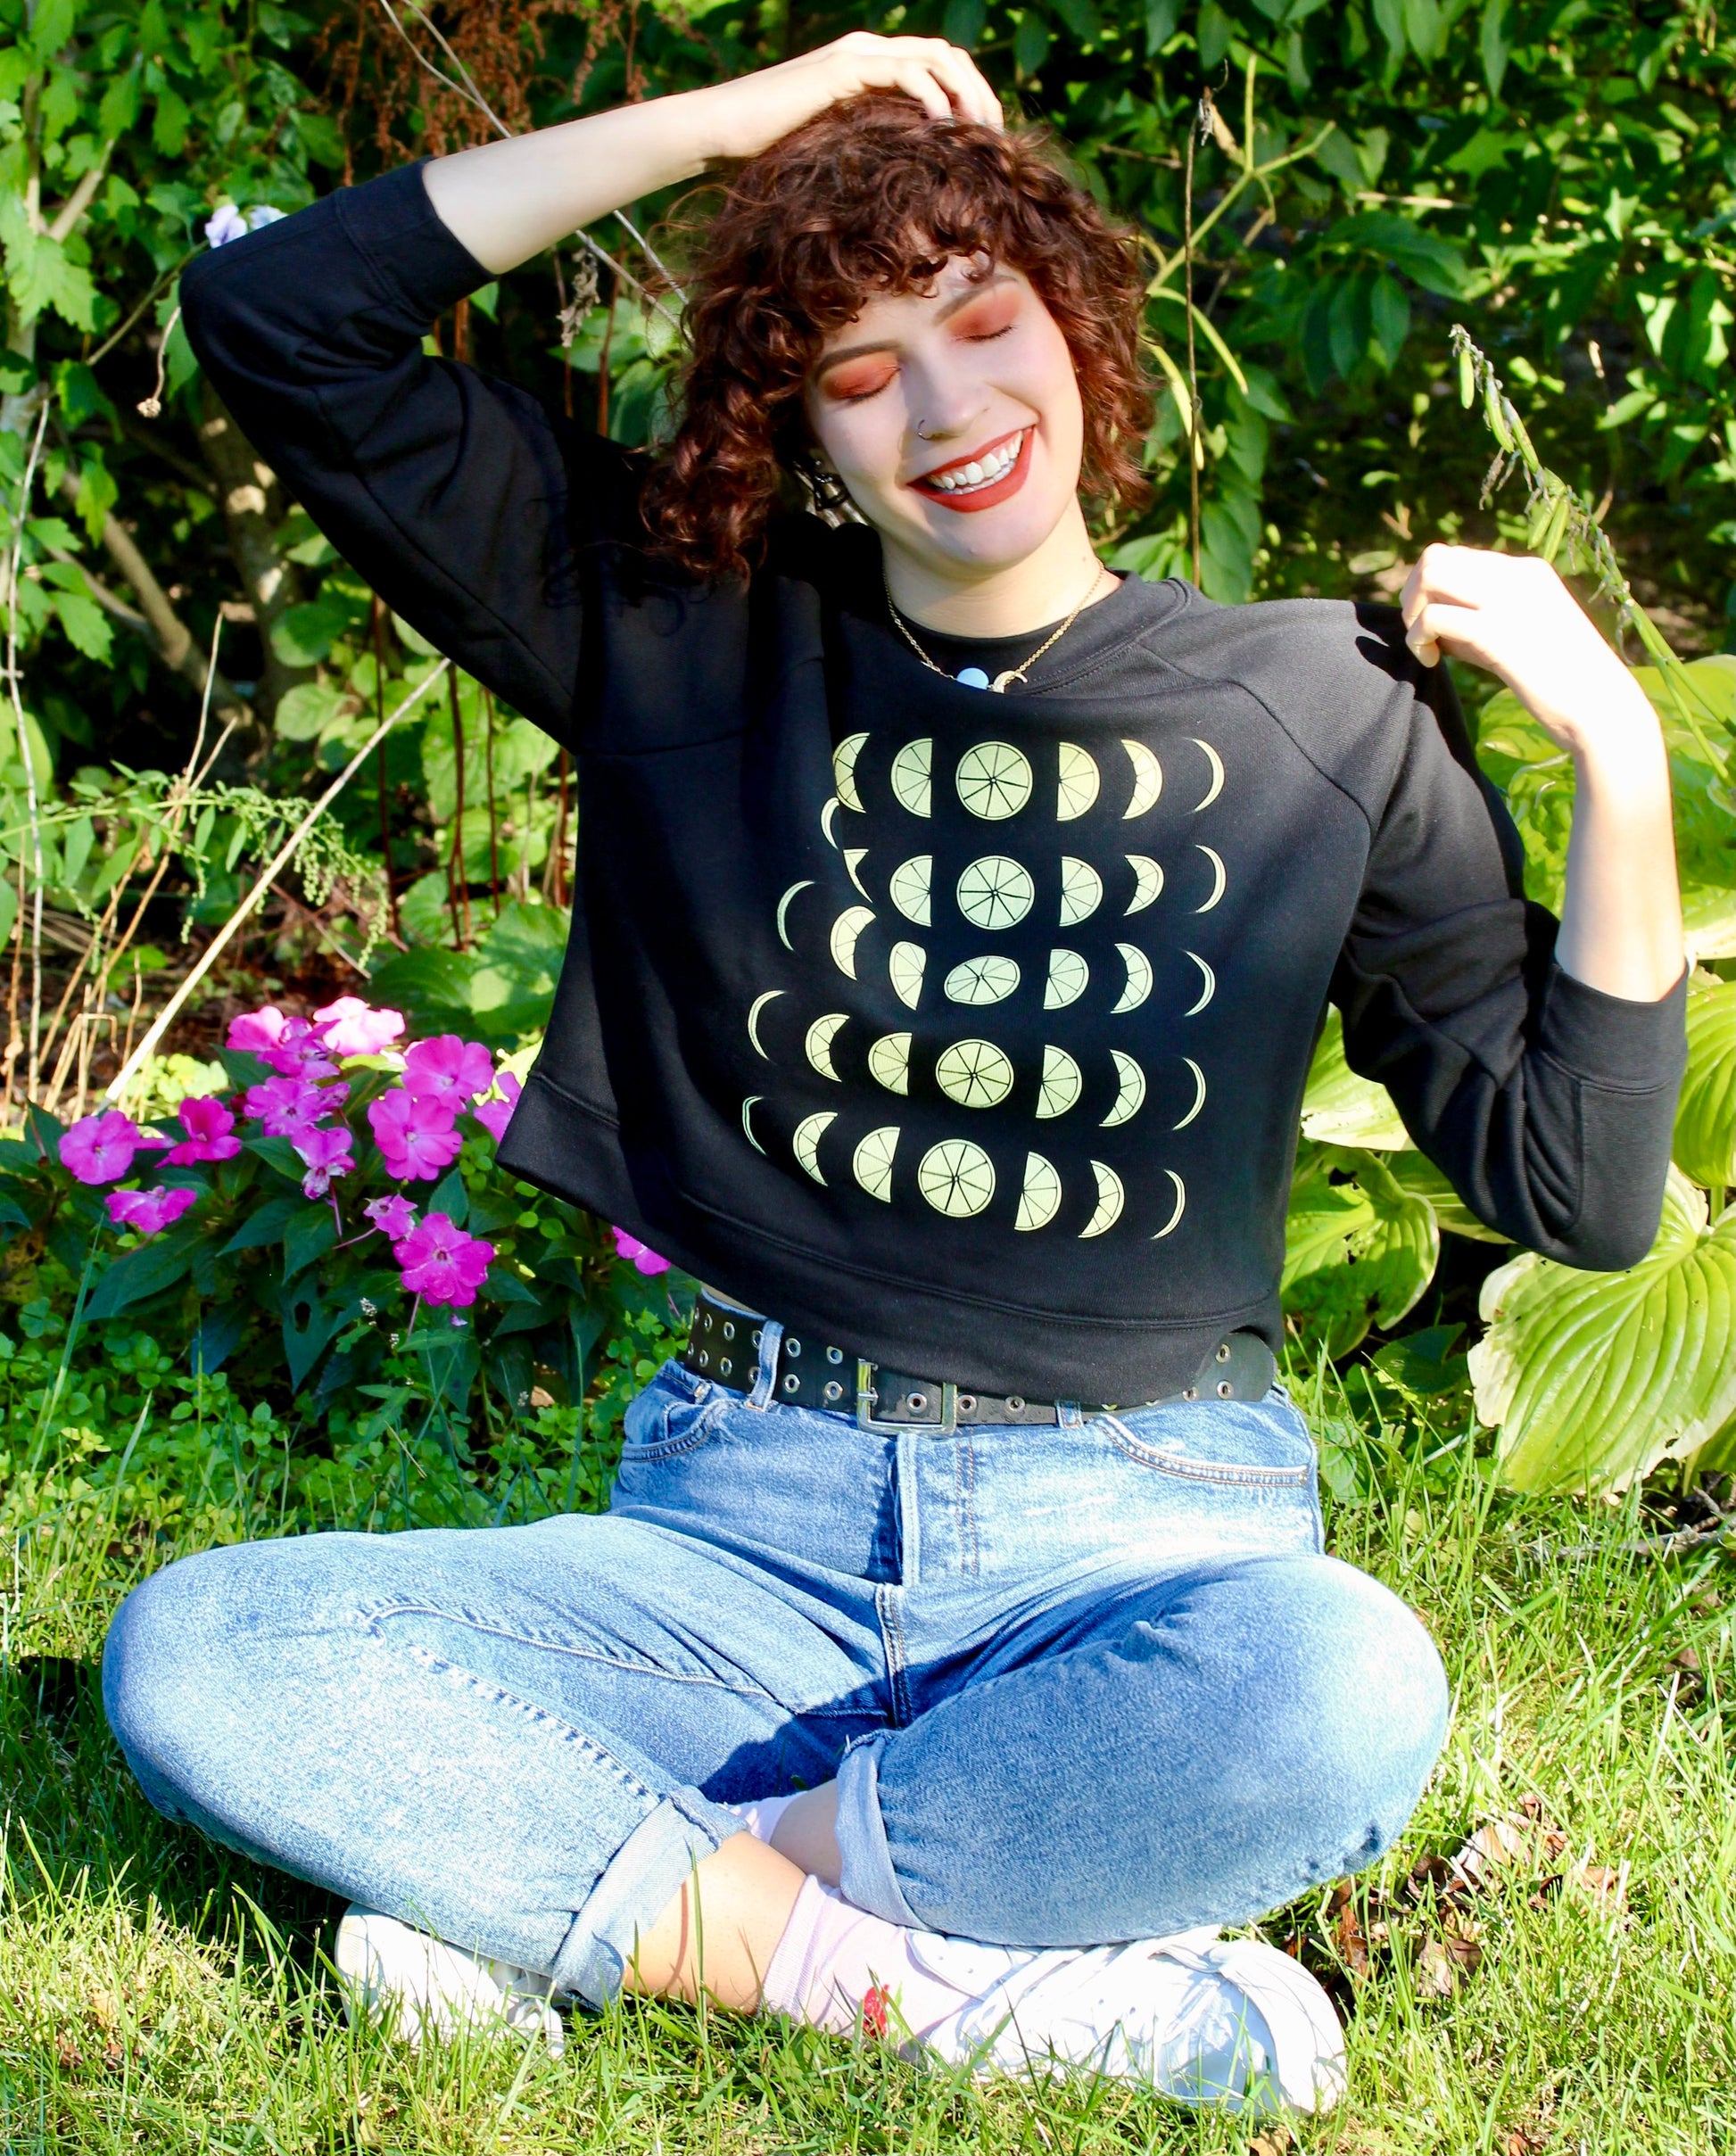 A woman in a black cropped sweatshirt with lemon design sits next to a garden